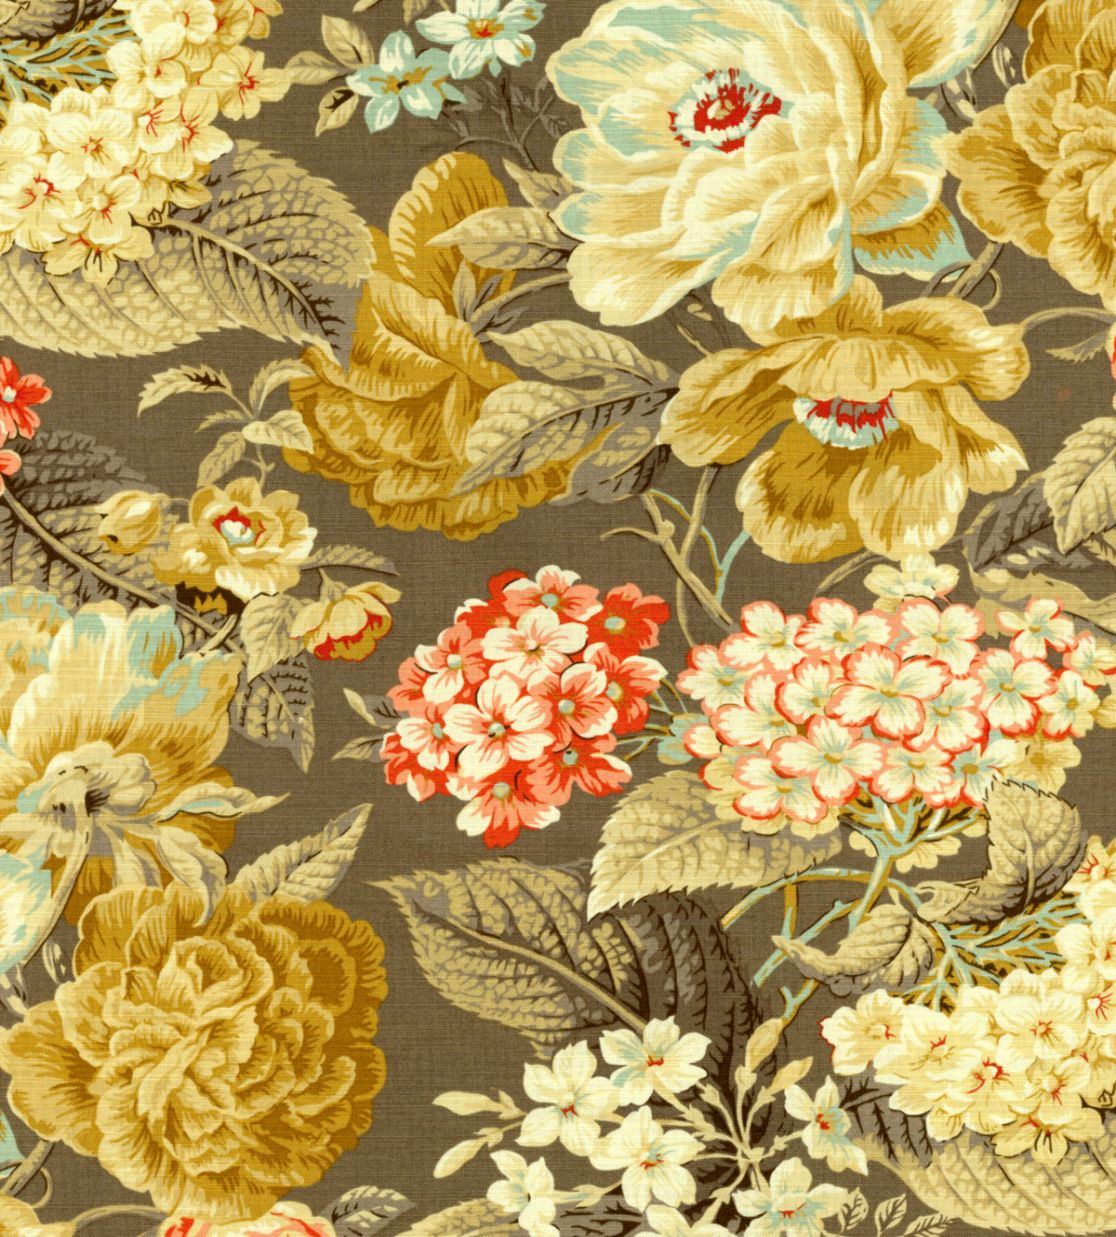 Home Decor Print Fabric Waverly Floral Flourish Clay - Waverly Floral Flourish Clay Fabric , HD Wallpaper & Backgrounds